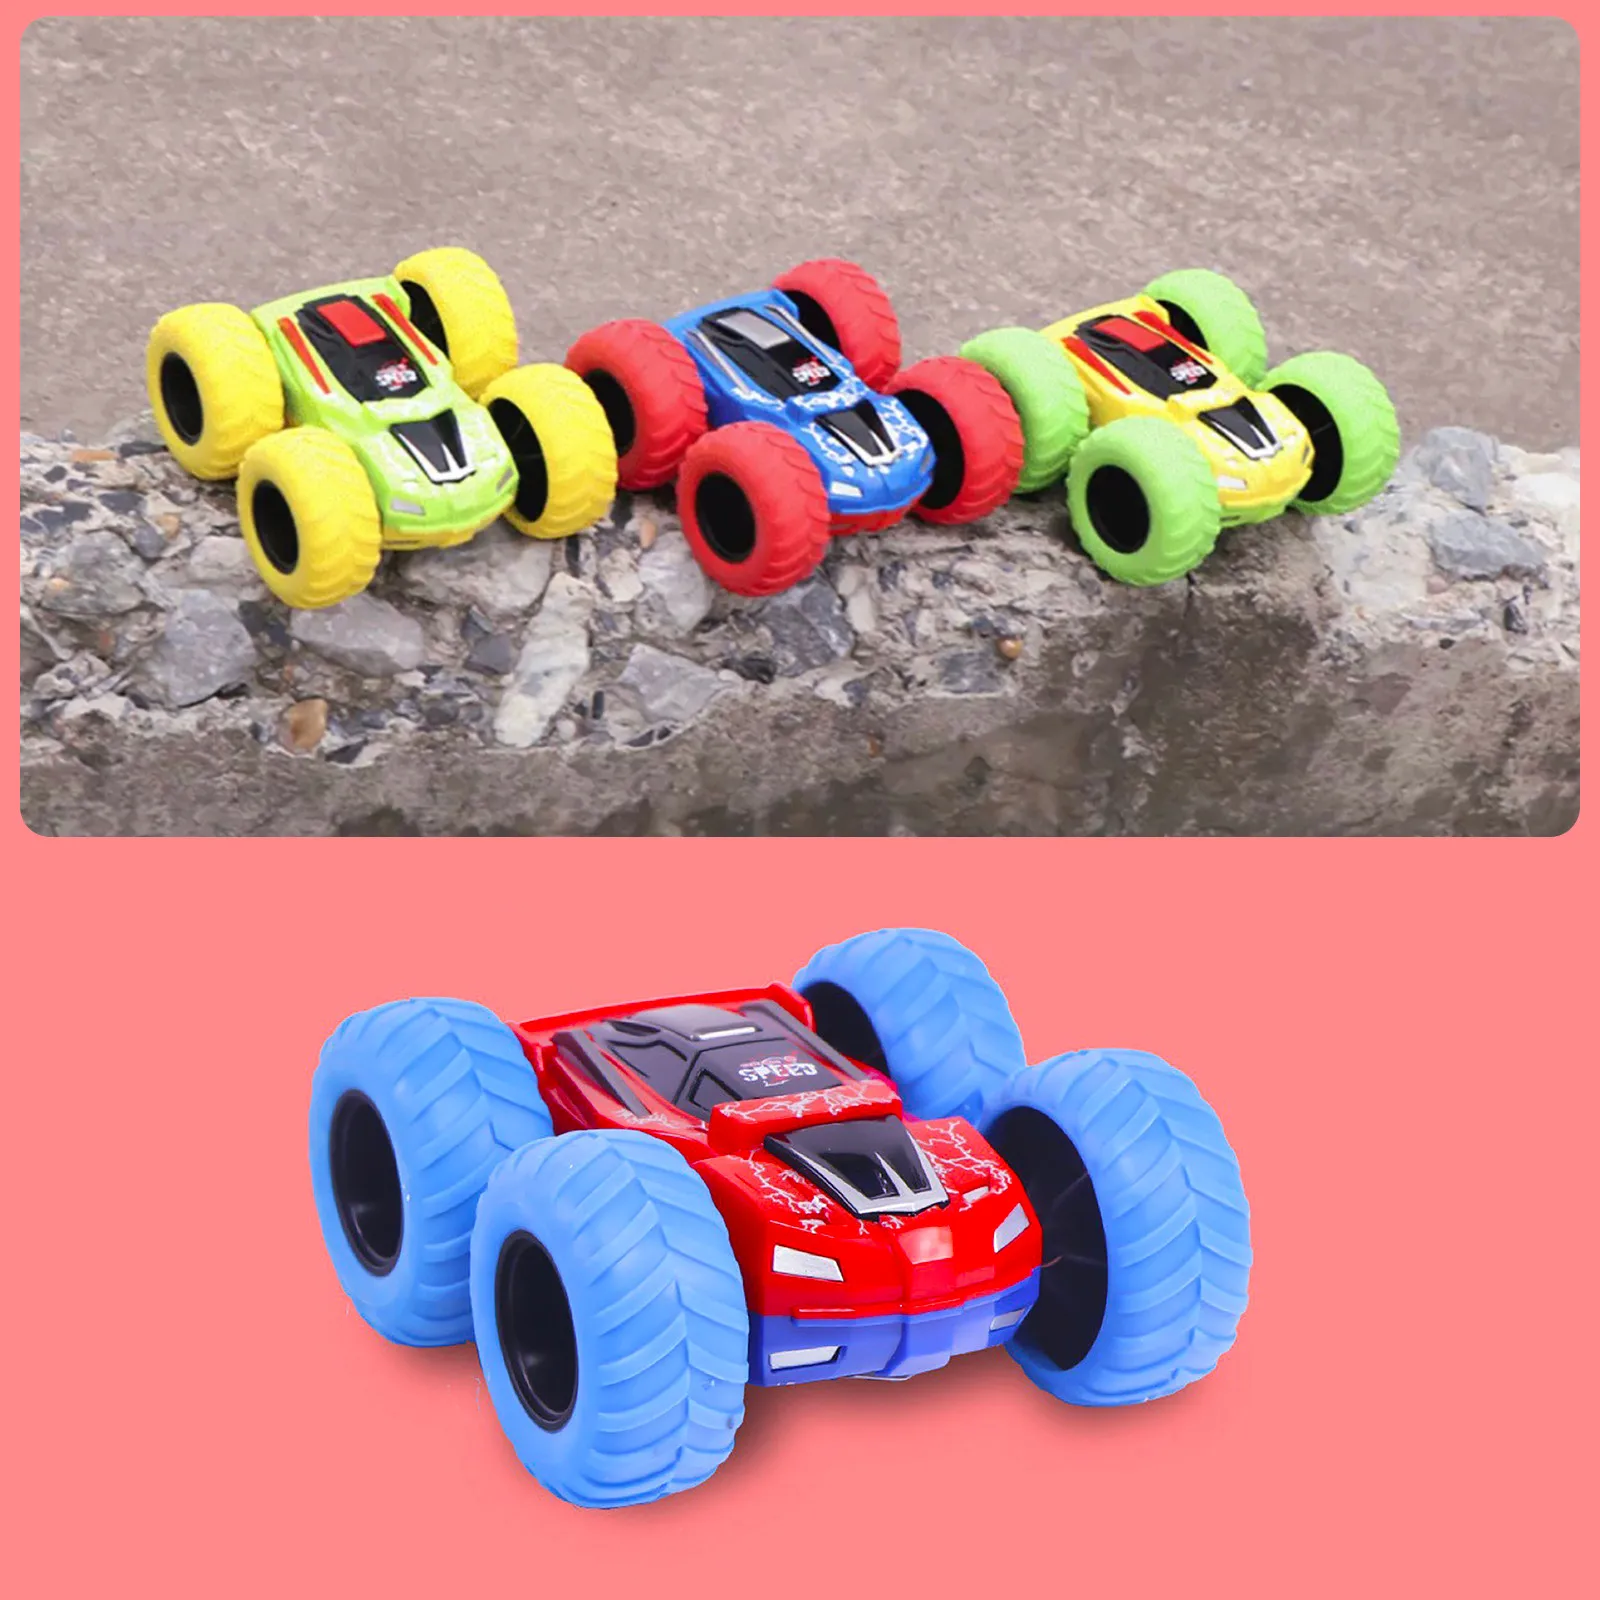 

toys for boys Pull Back Cars Toys Truck Double-Sided Inertance Friction Powered Vehicles Gift zabawki dla dzieci juguetes#L35